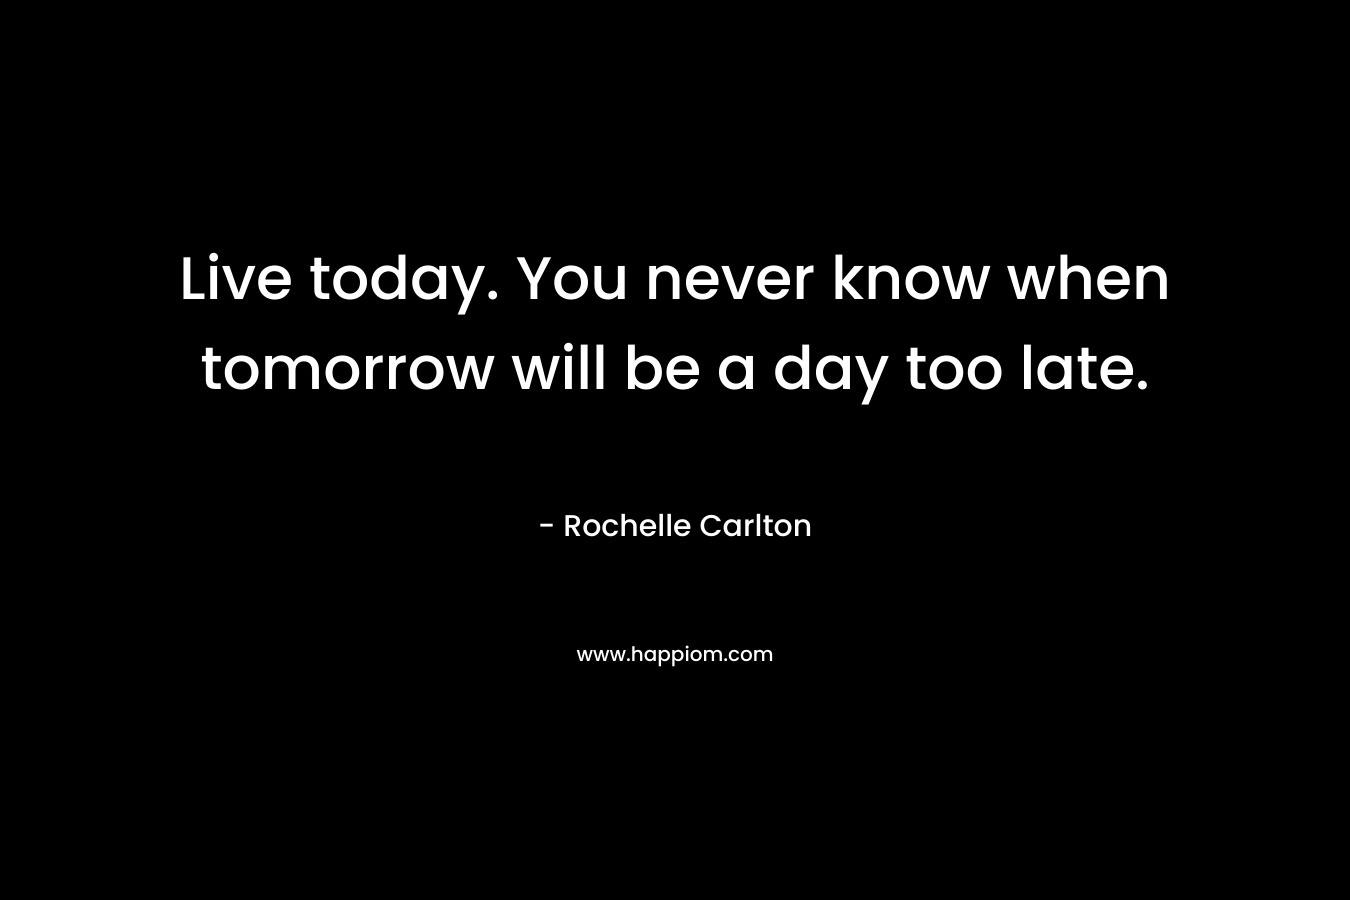 Live today. You never know when tomorrow will be a day too late.